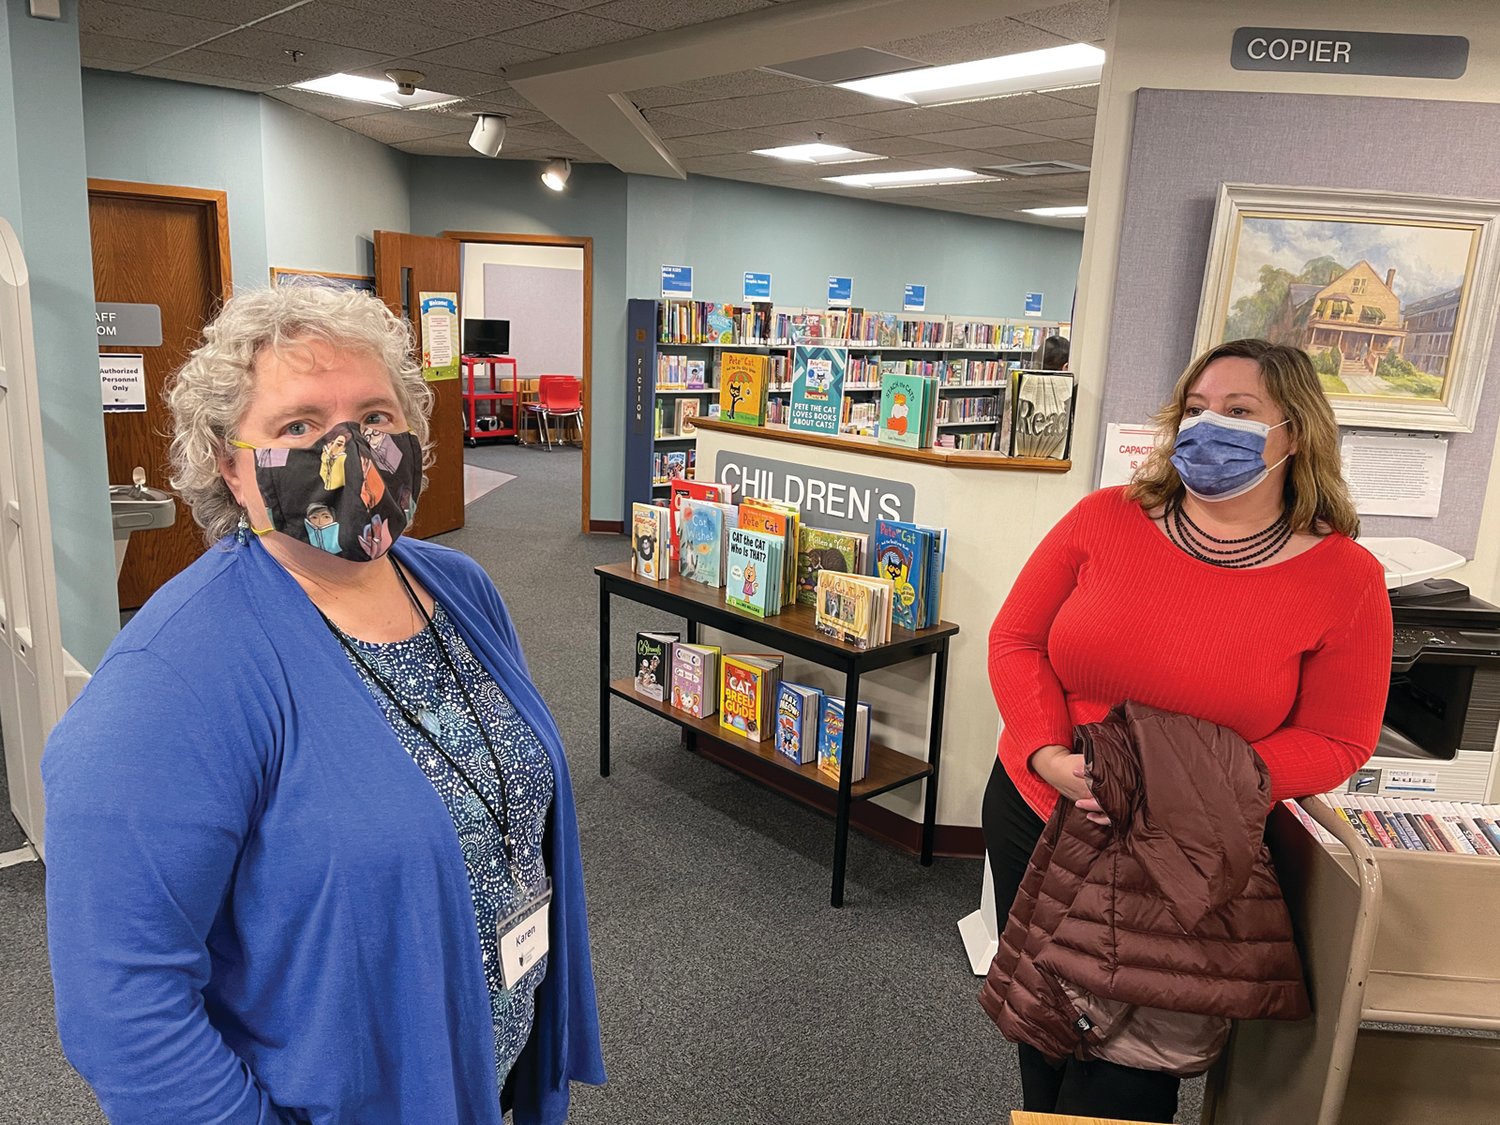 GREETINGS FROM CENTRAL:Auburn Branch Librarian Karen McGrath, left, and Assistant Library Director Julie Holden chat during last week’s event at Auburn.